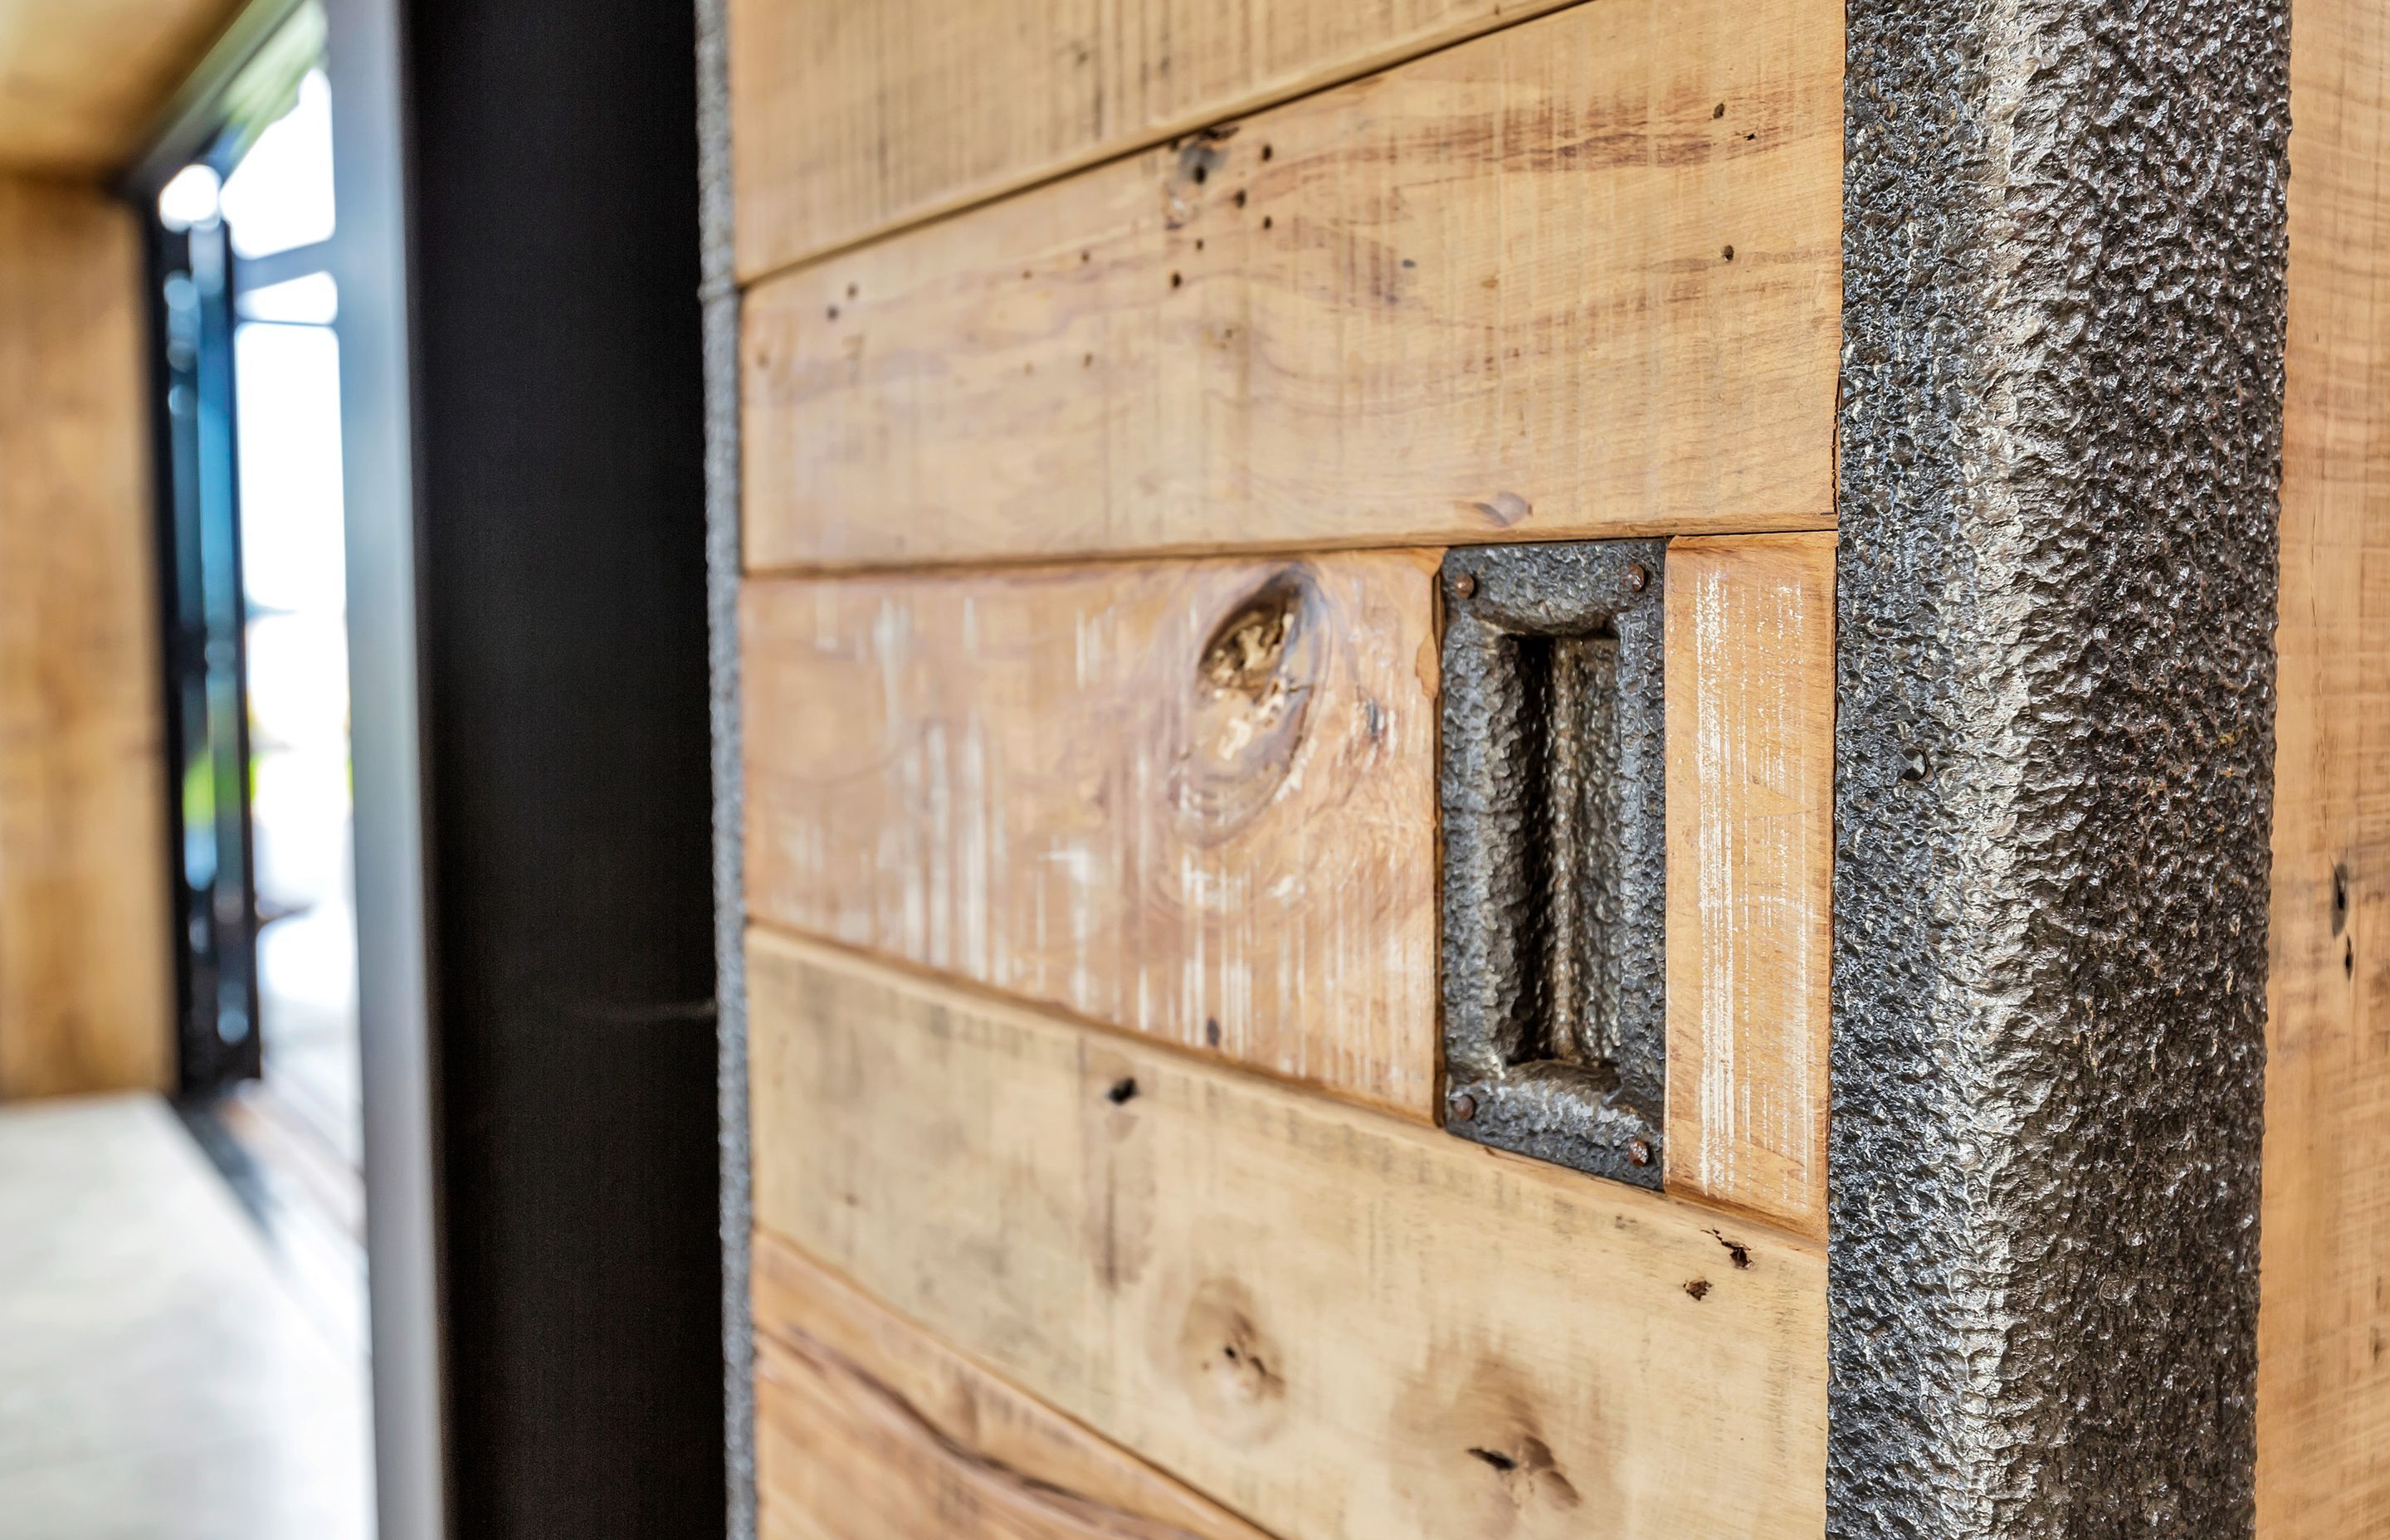 The sliding doors were handcrafted from recycled rimu floor joists from the Whitcoulls building in Wellington and the recycled inside of cyanide tanks from a Waihi goldmine.